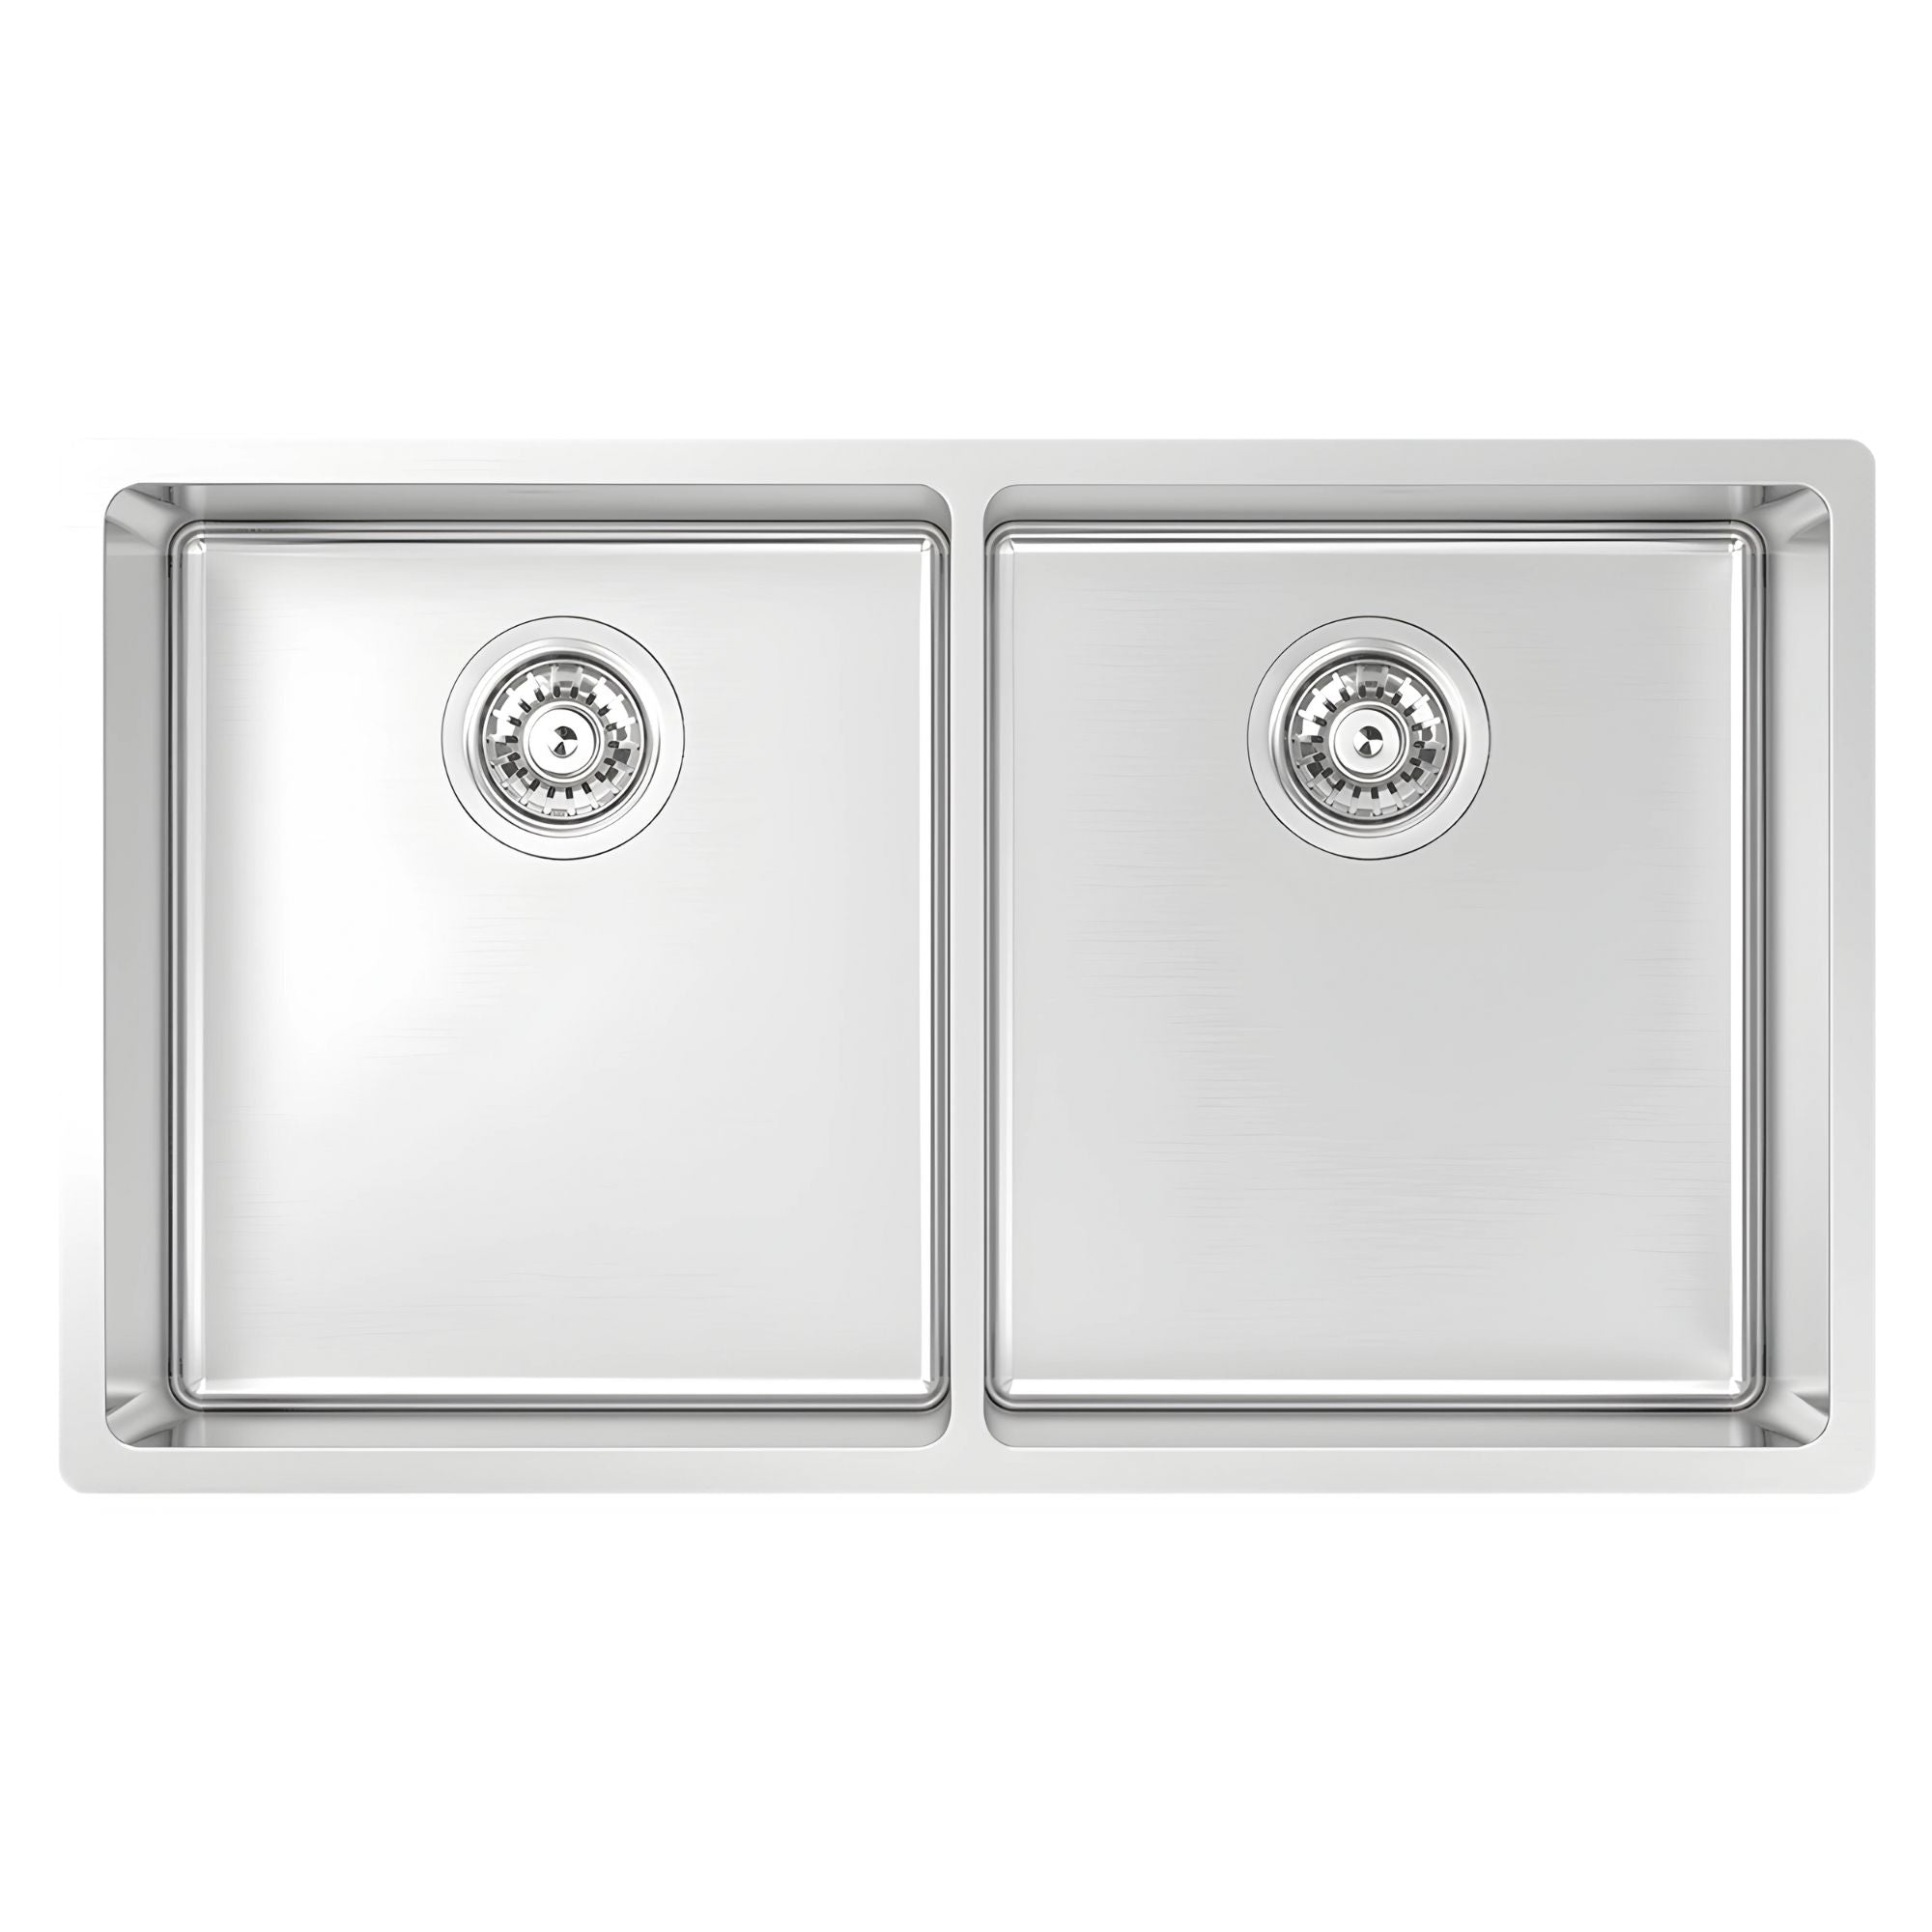 ABEY MONTEGO DOUBLE BOWL KITCHEN SINK STAINLESS STEEL 775MM